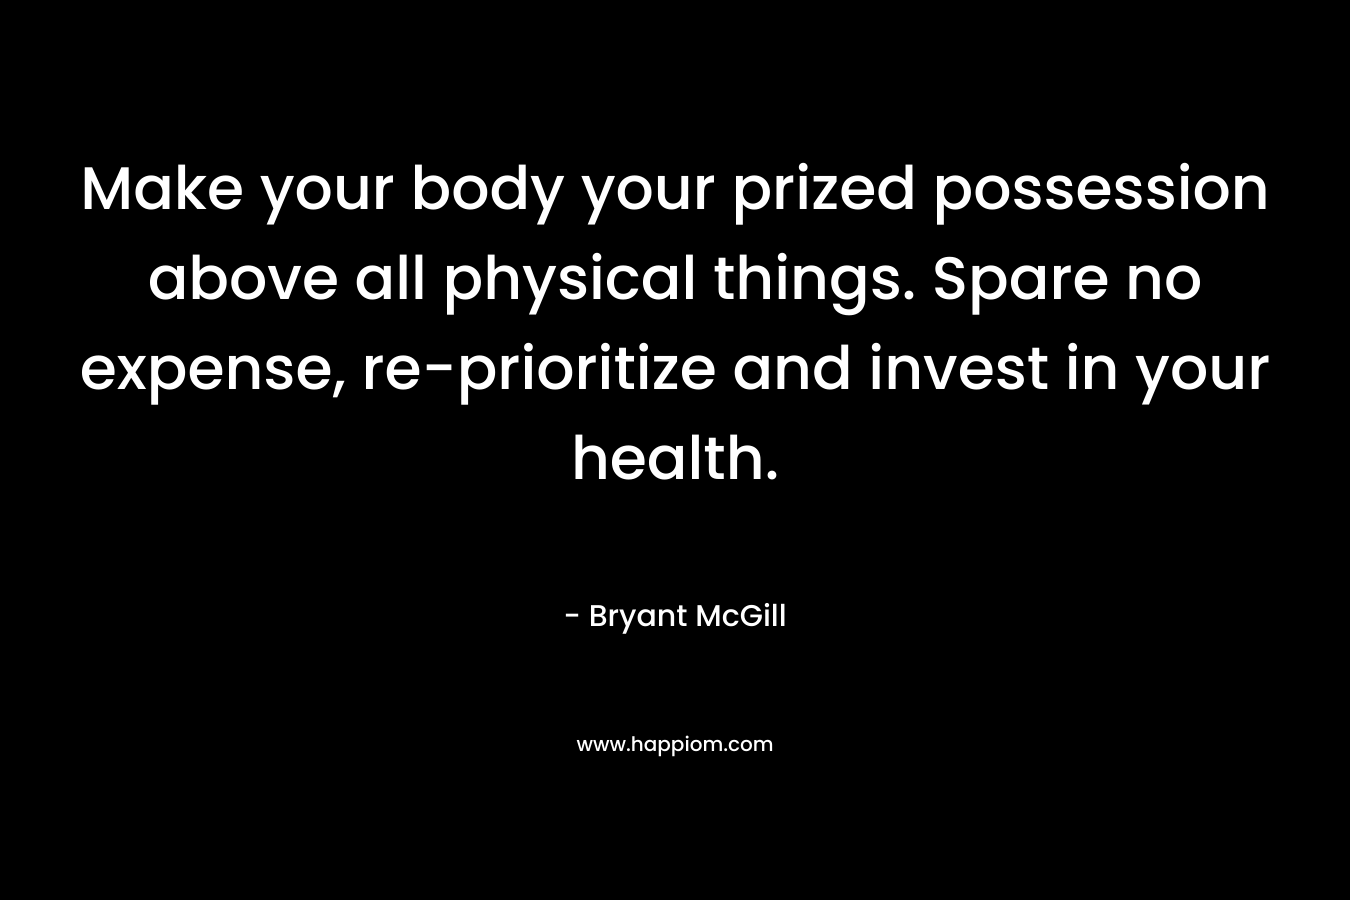 Make your body your prized possession above all physical things. Spare no expense, re-prioritize and invest in your health. – Bryant McGill